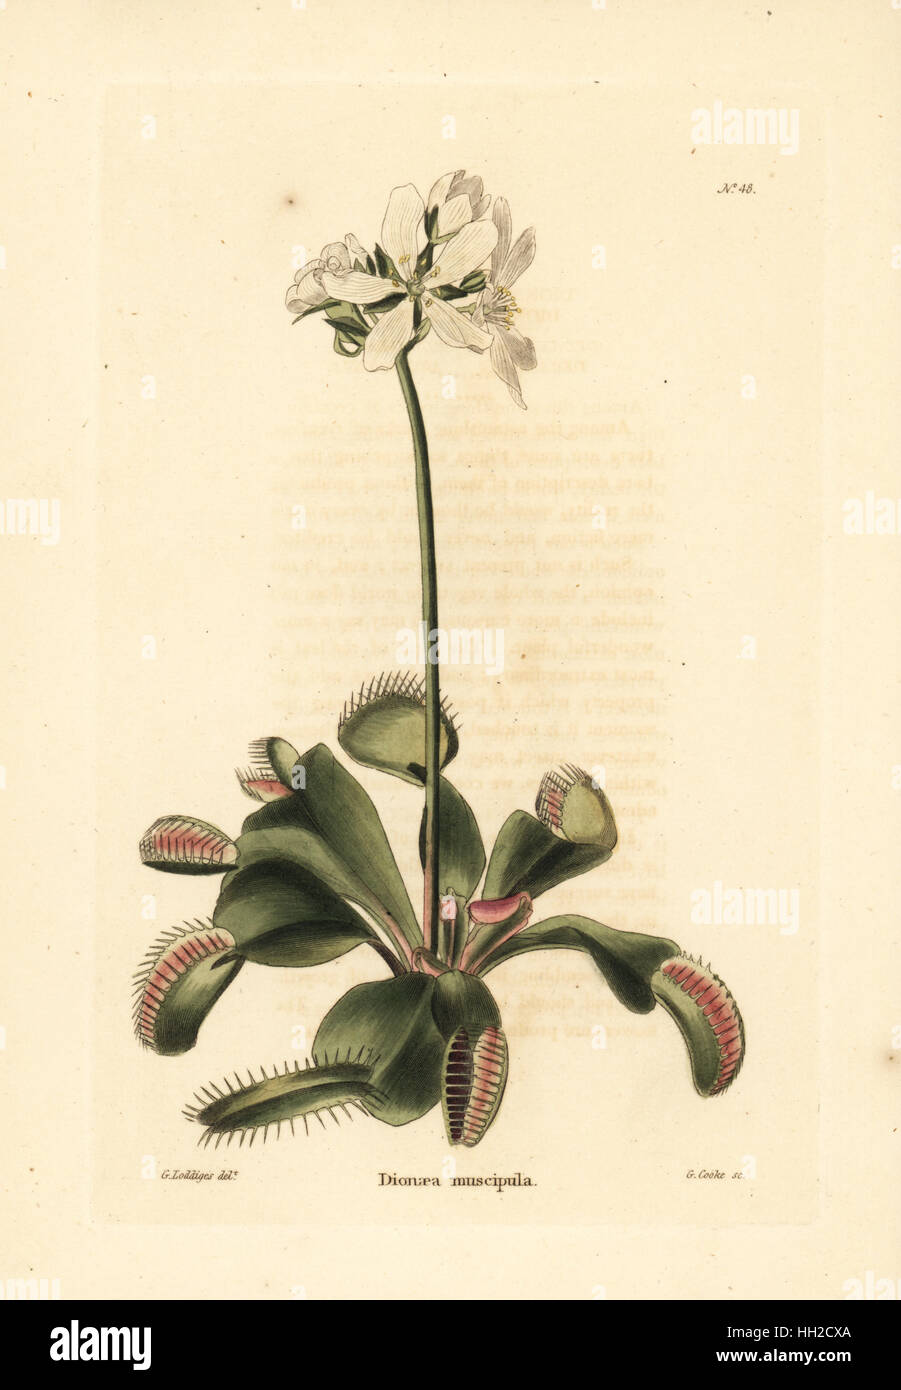 Venus flytrap, Dionaea muscipula. Vulnerable. Handcoloured copperplate engraving by George Cooke after George Loddiges from Conrad Loddiges' Botanical Cabinet, Hackney, 1817. Stock Photo